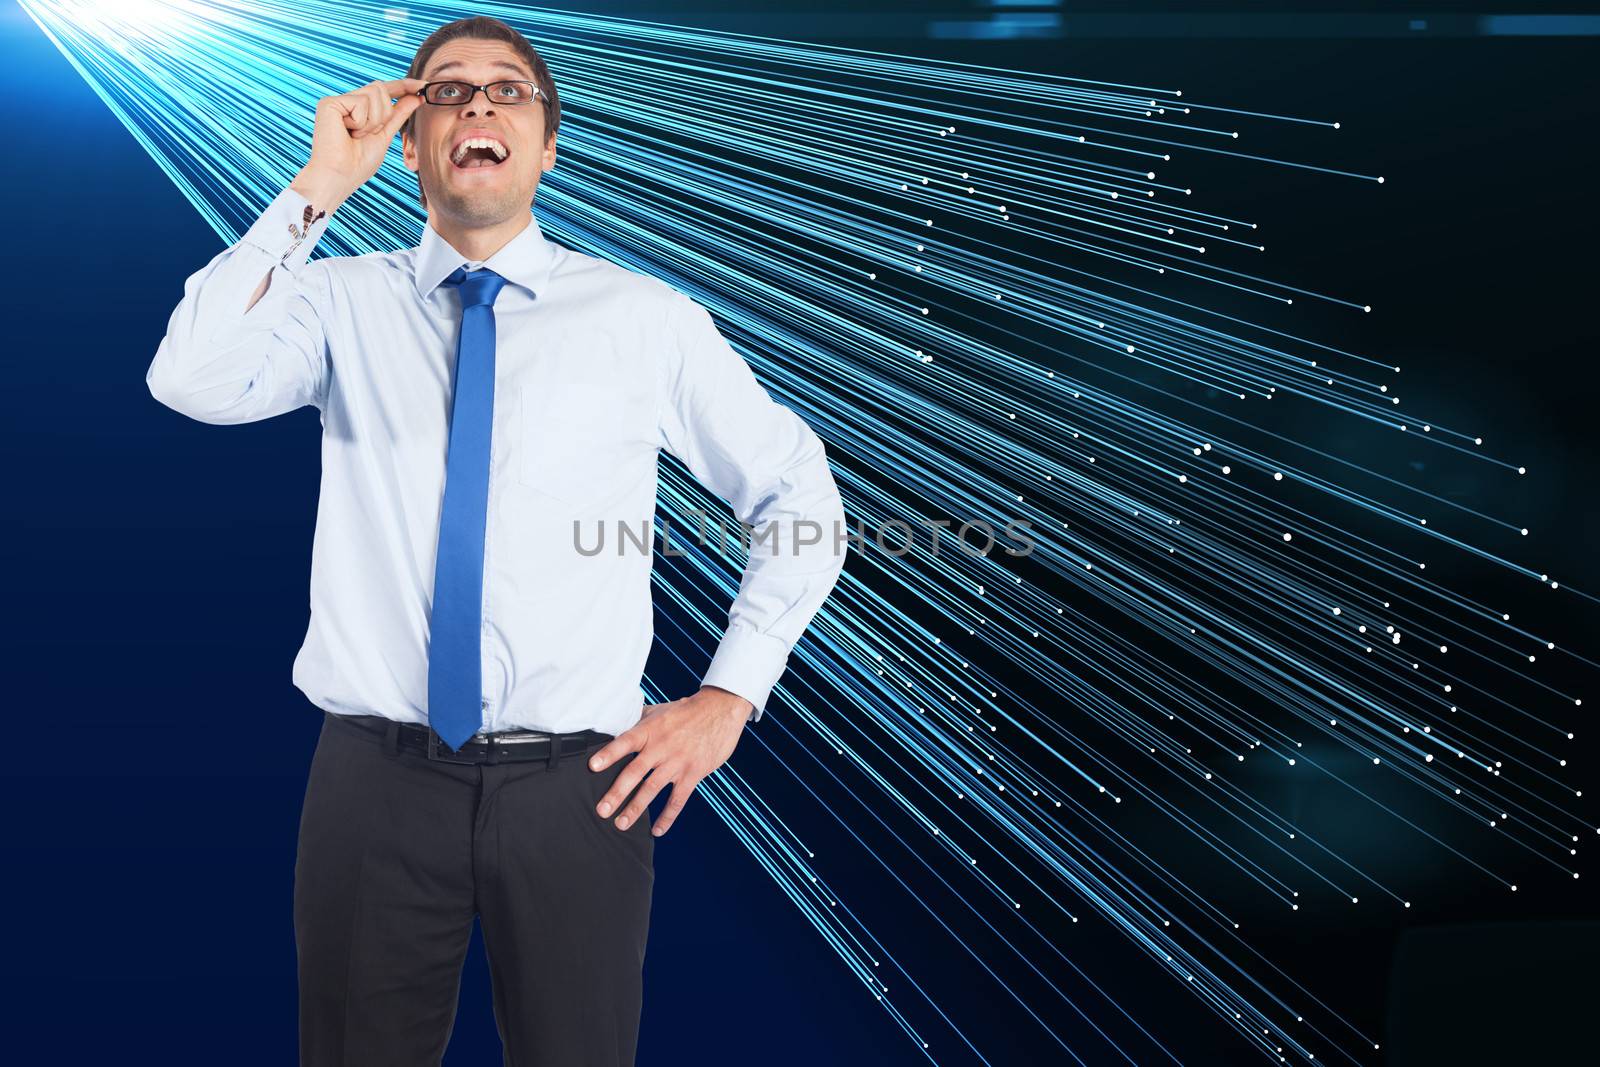 Thinking businessman tilting glasses against abstract technology background